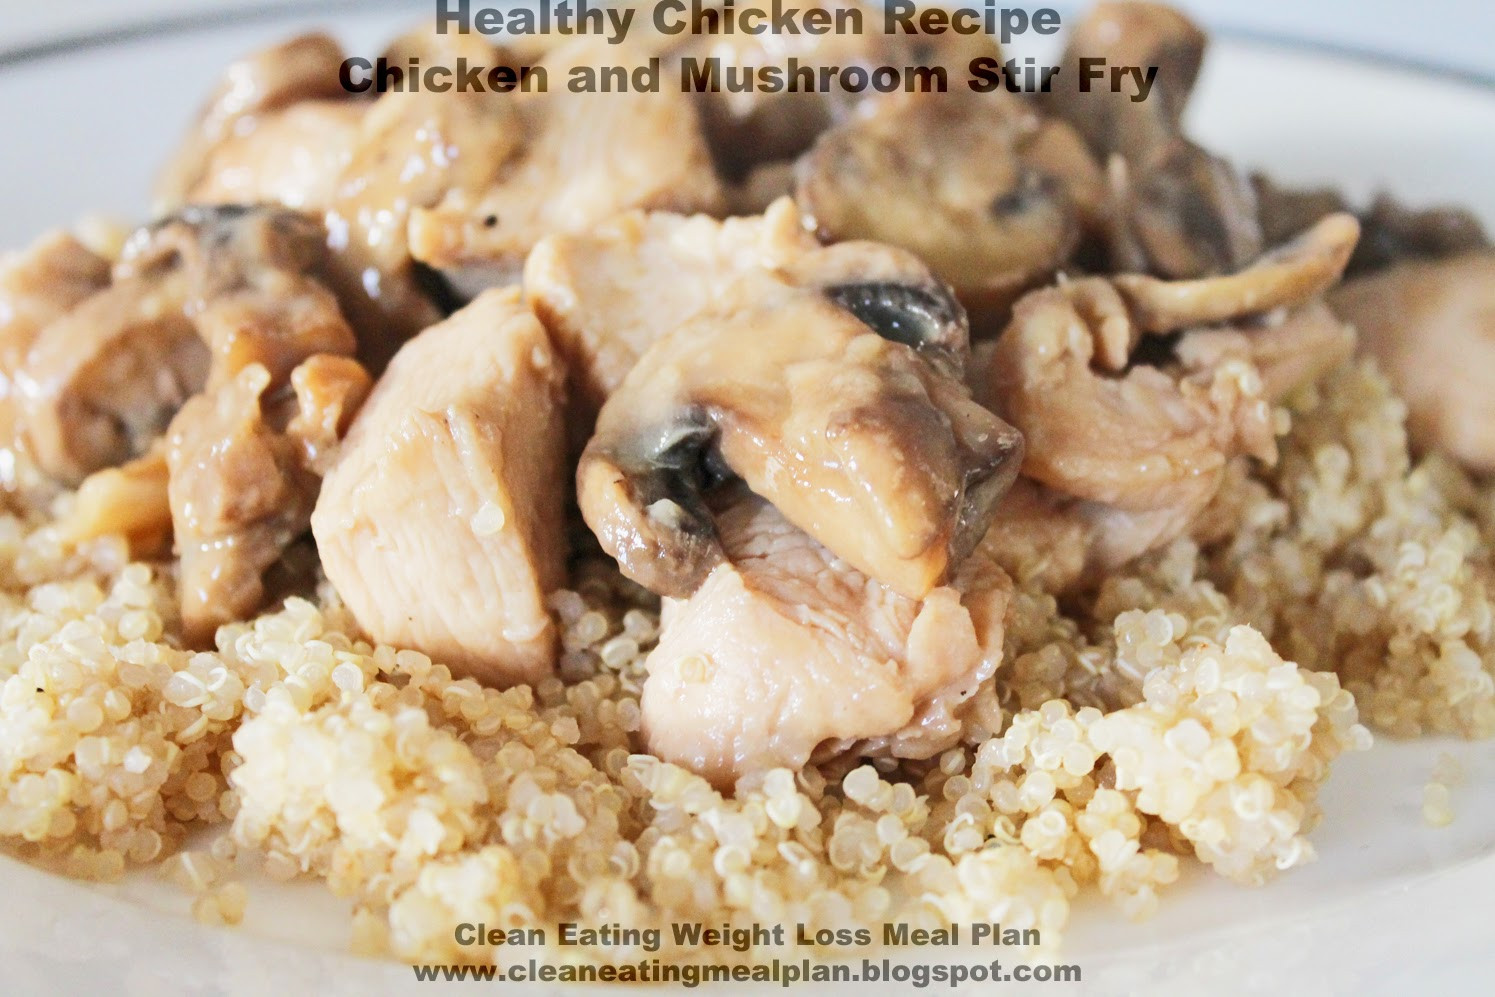 Healthy Chicken Recipes For Weight Loss
 Healthy Chicken Recipe Chicken and Mushroom Stir Fry